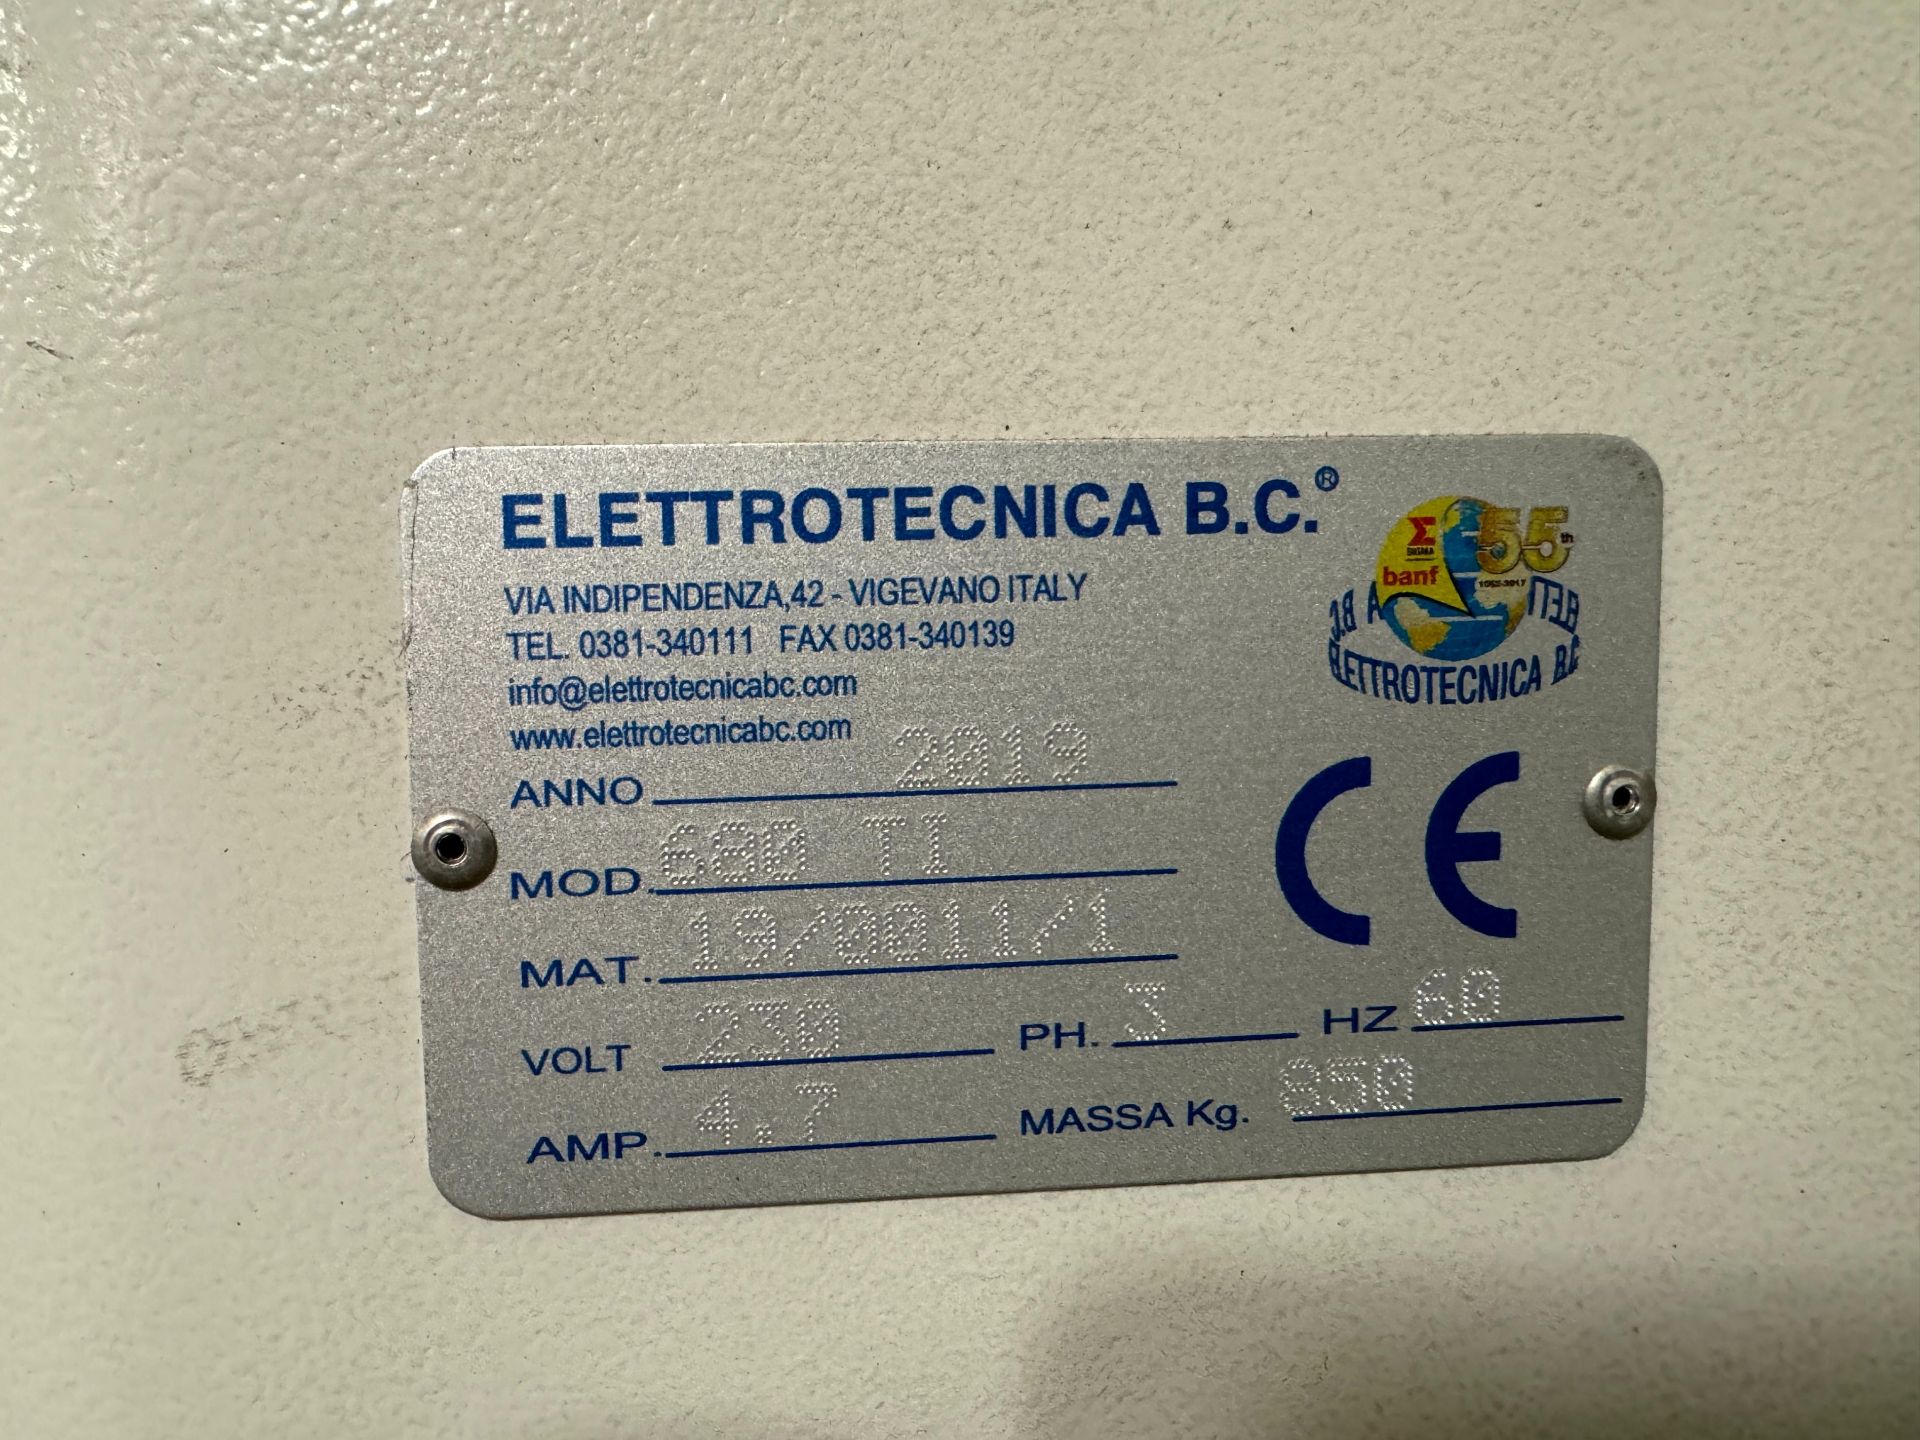 2019 ELETTROTECNICA B.C. HEEL LASTING MACHINE W/ AUTO GLUE AND PROGRAMMABLE PINCERS, MODEL 680 TI - Image 9 of 9